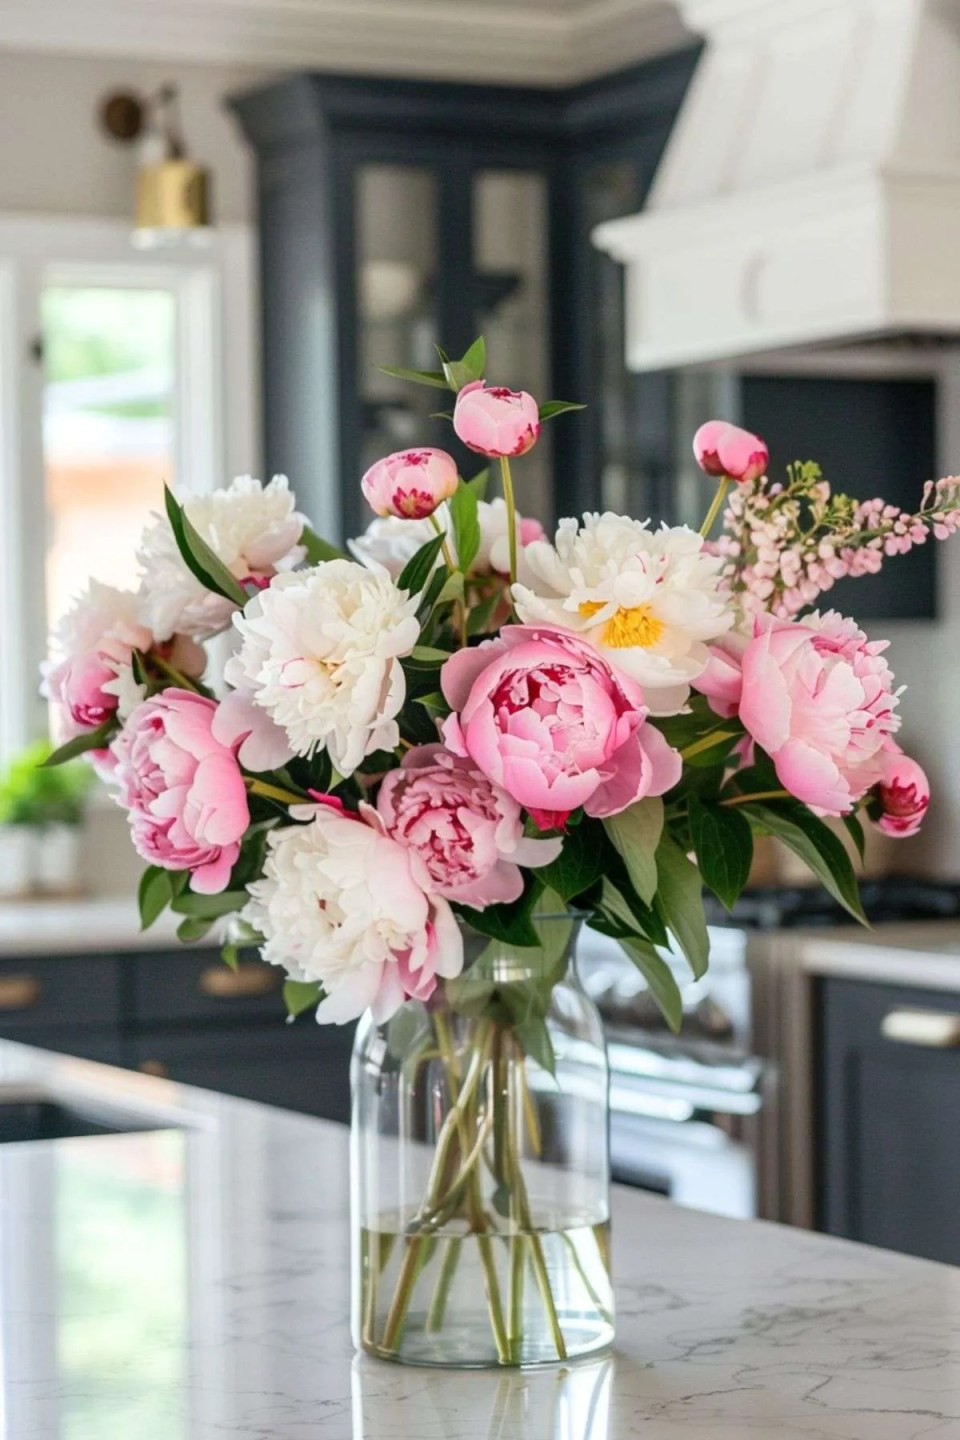 peonies in a vase in a kitchen